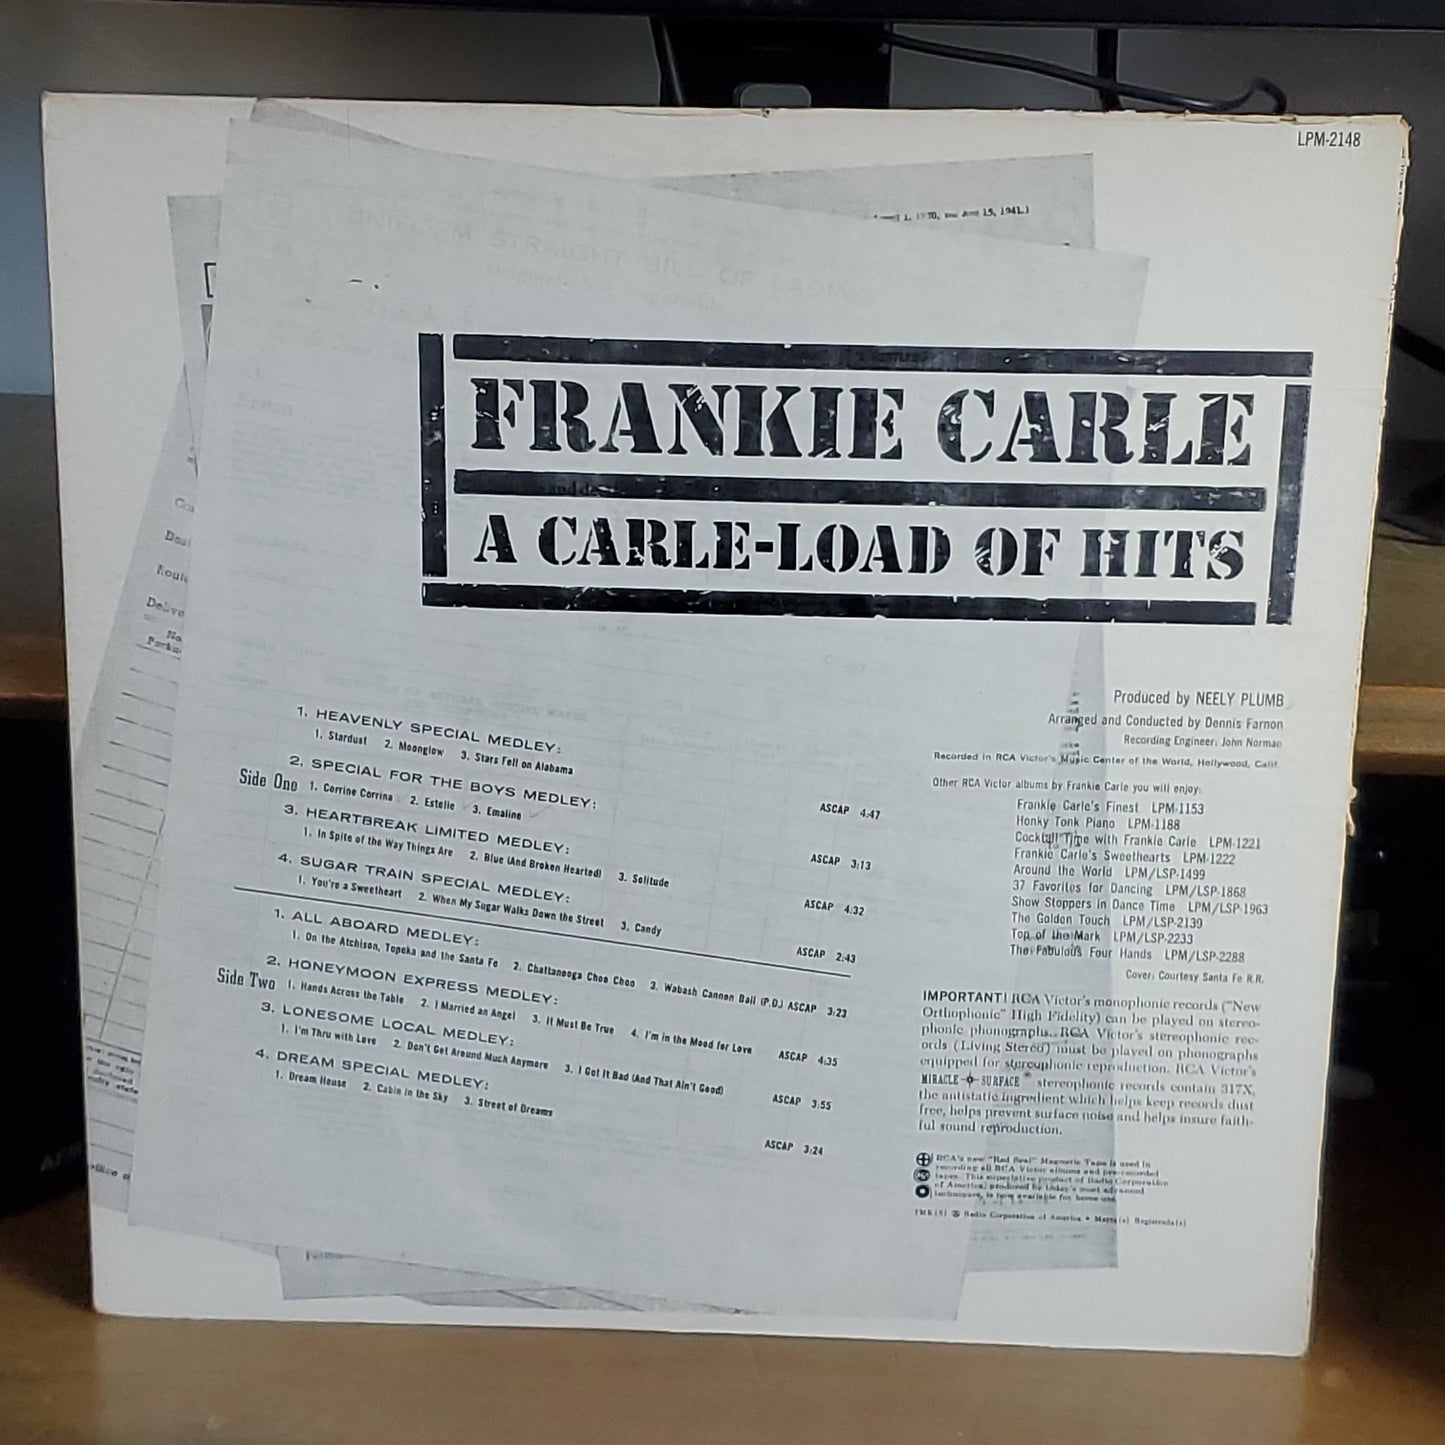 Frankie Carle A Carle-Load of Hits Produced By Neely Plumb By RCA Records